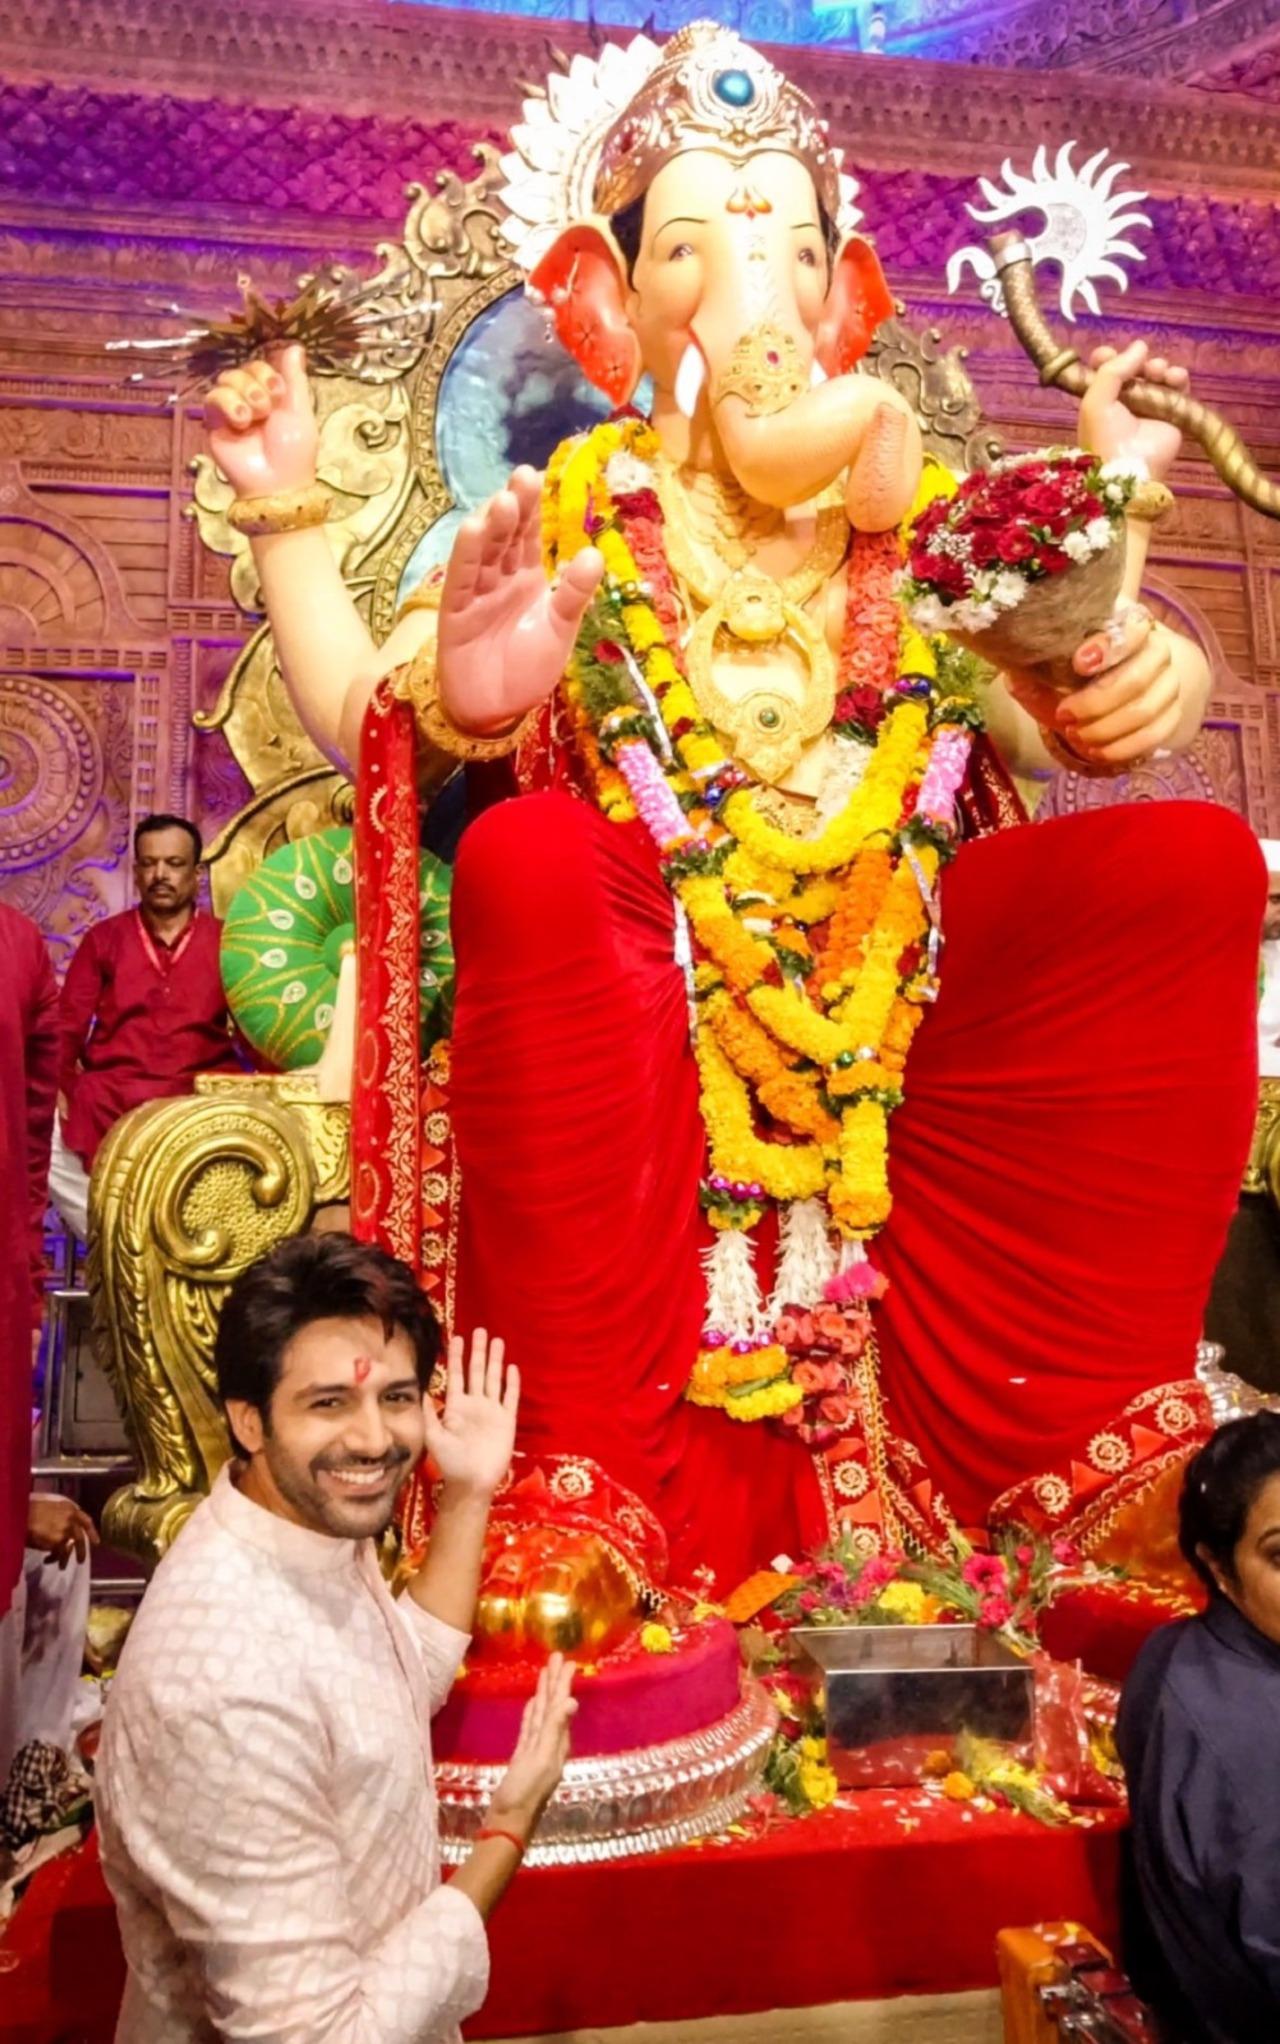 Kartik Aaryan was at Lalbaugcha Raja in Mumbai in 2022. The actor offered prayers and also clicked pictures with the idol of Lord Ganesh